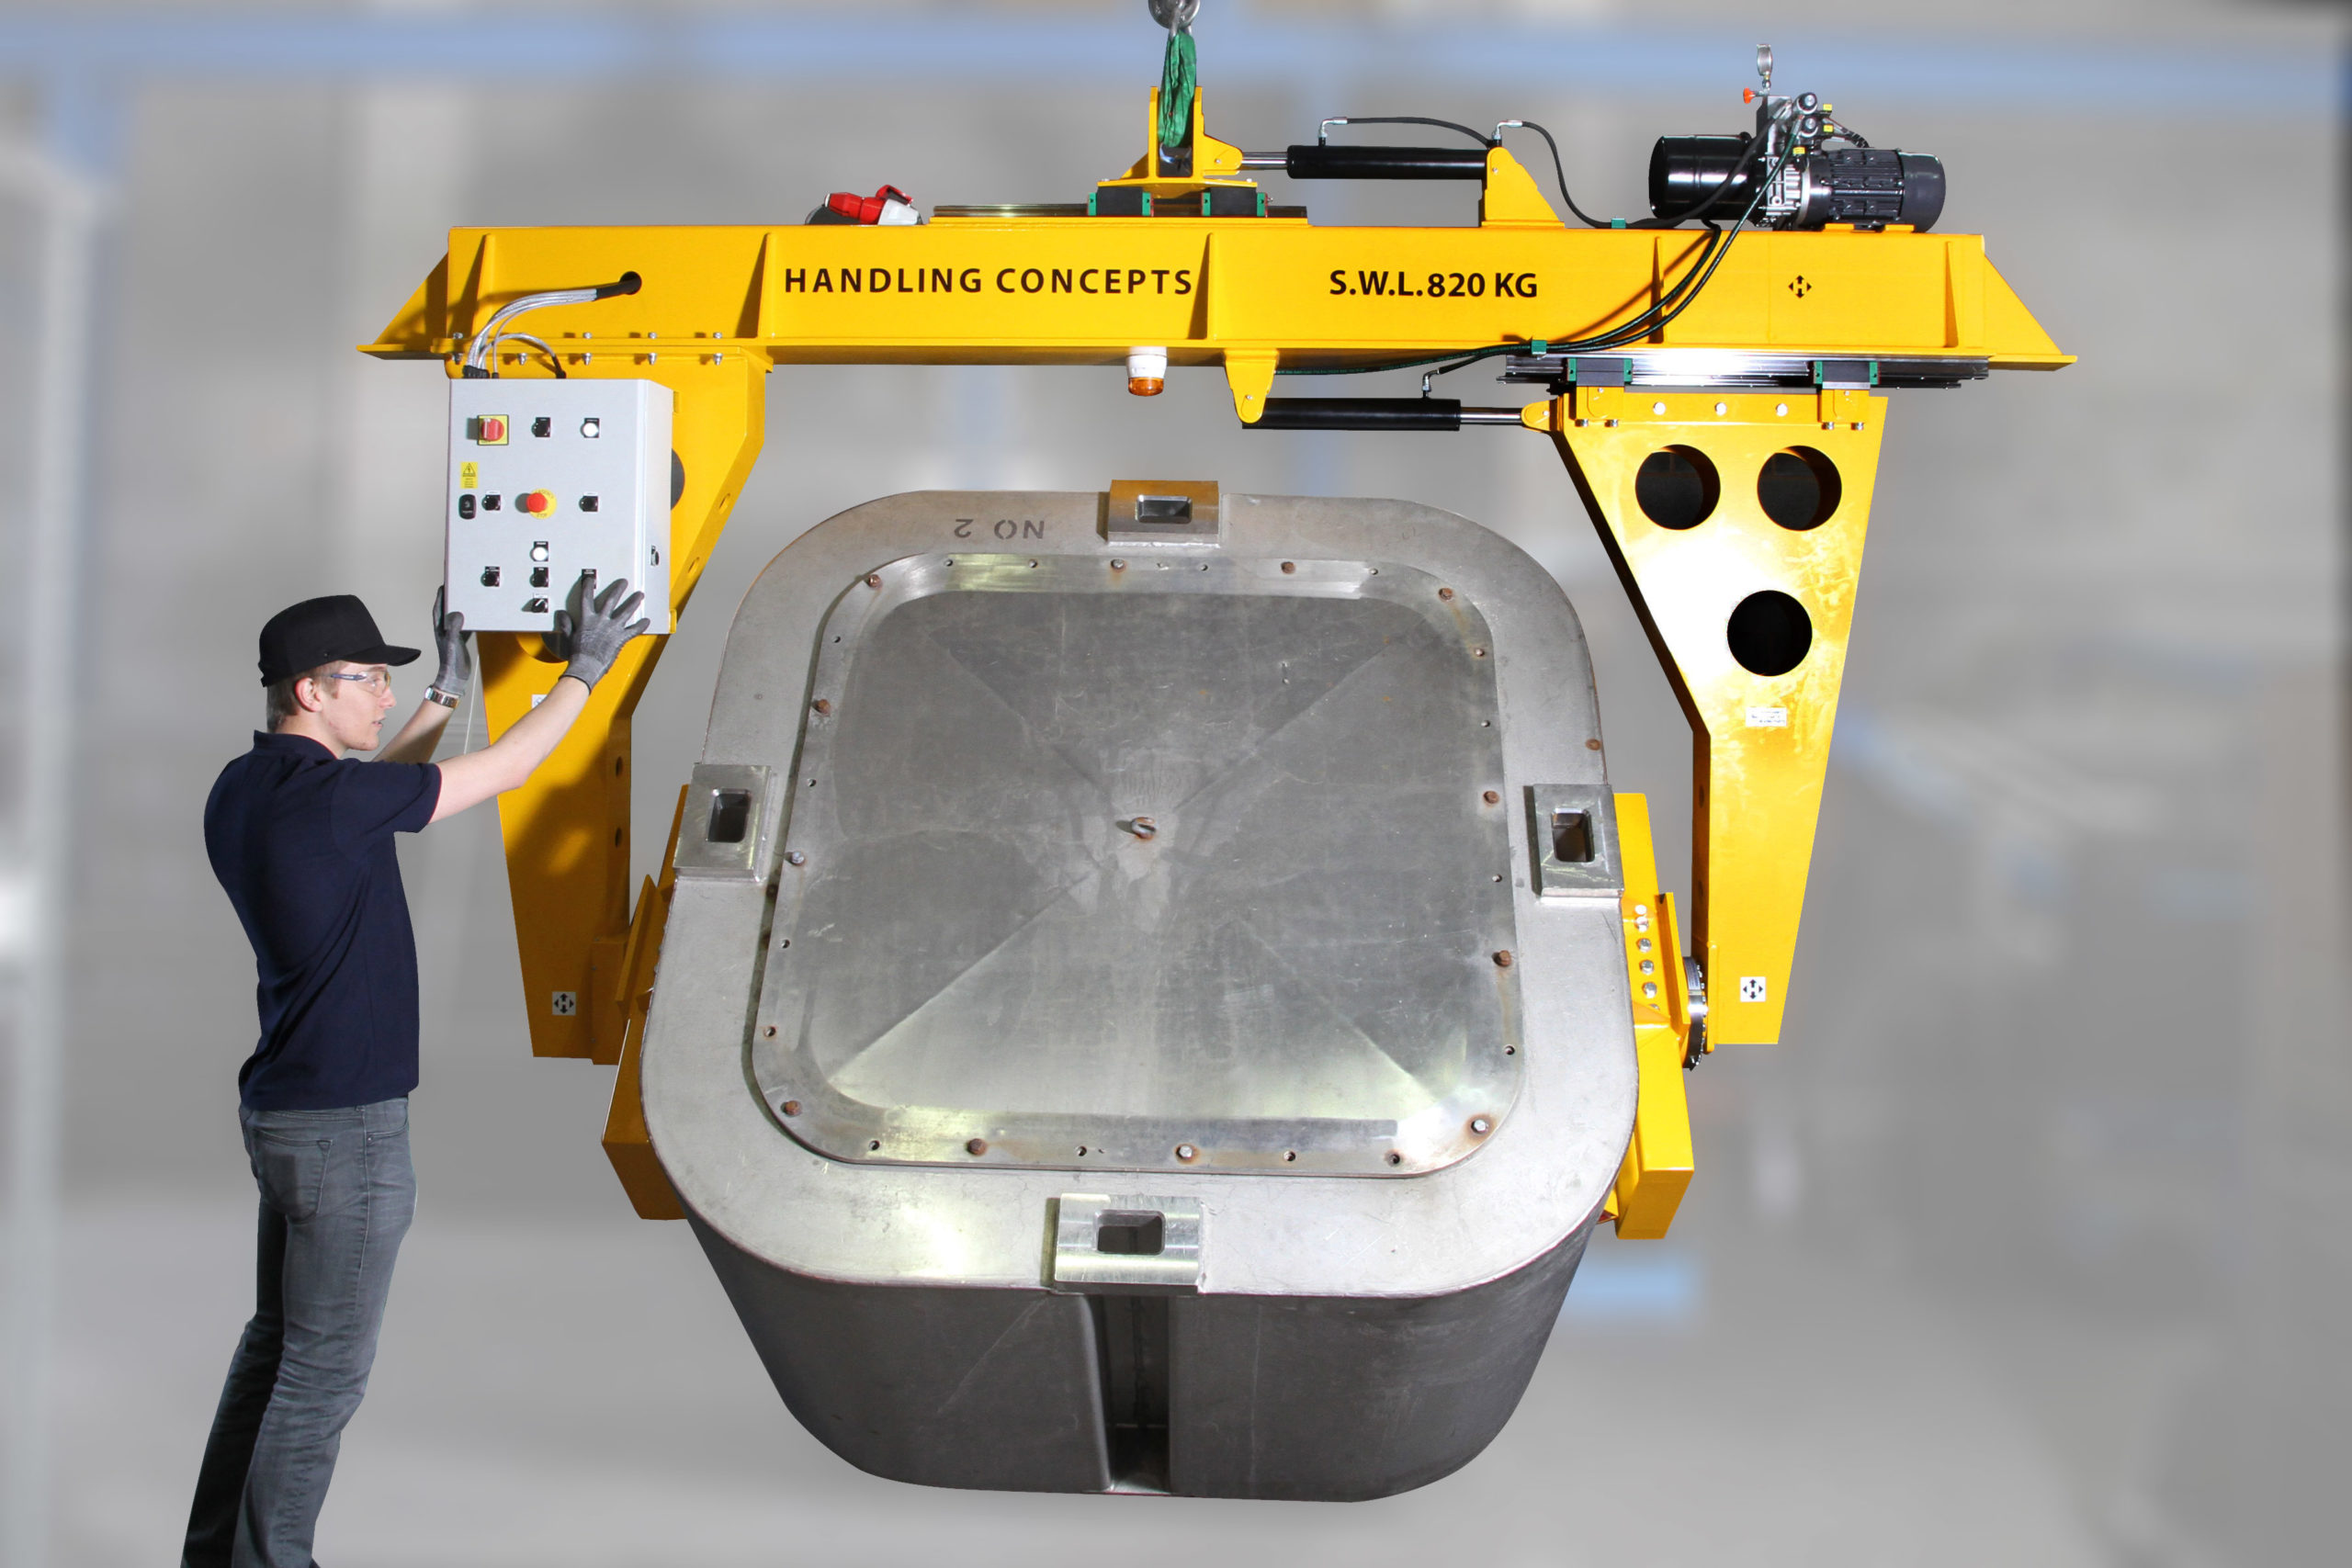 Handling Concepts' Turning Grippers Material Handling Equipment Solution